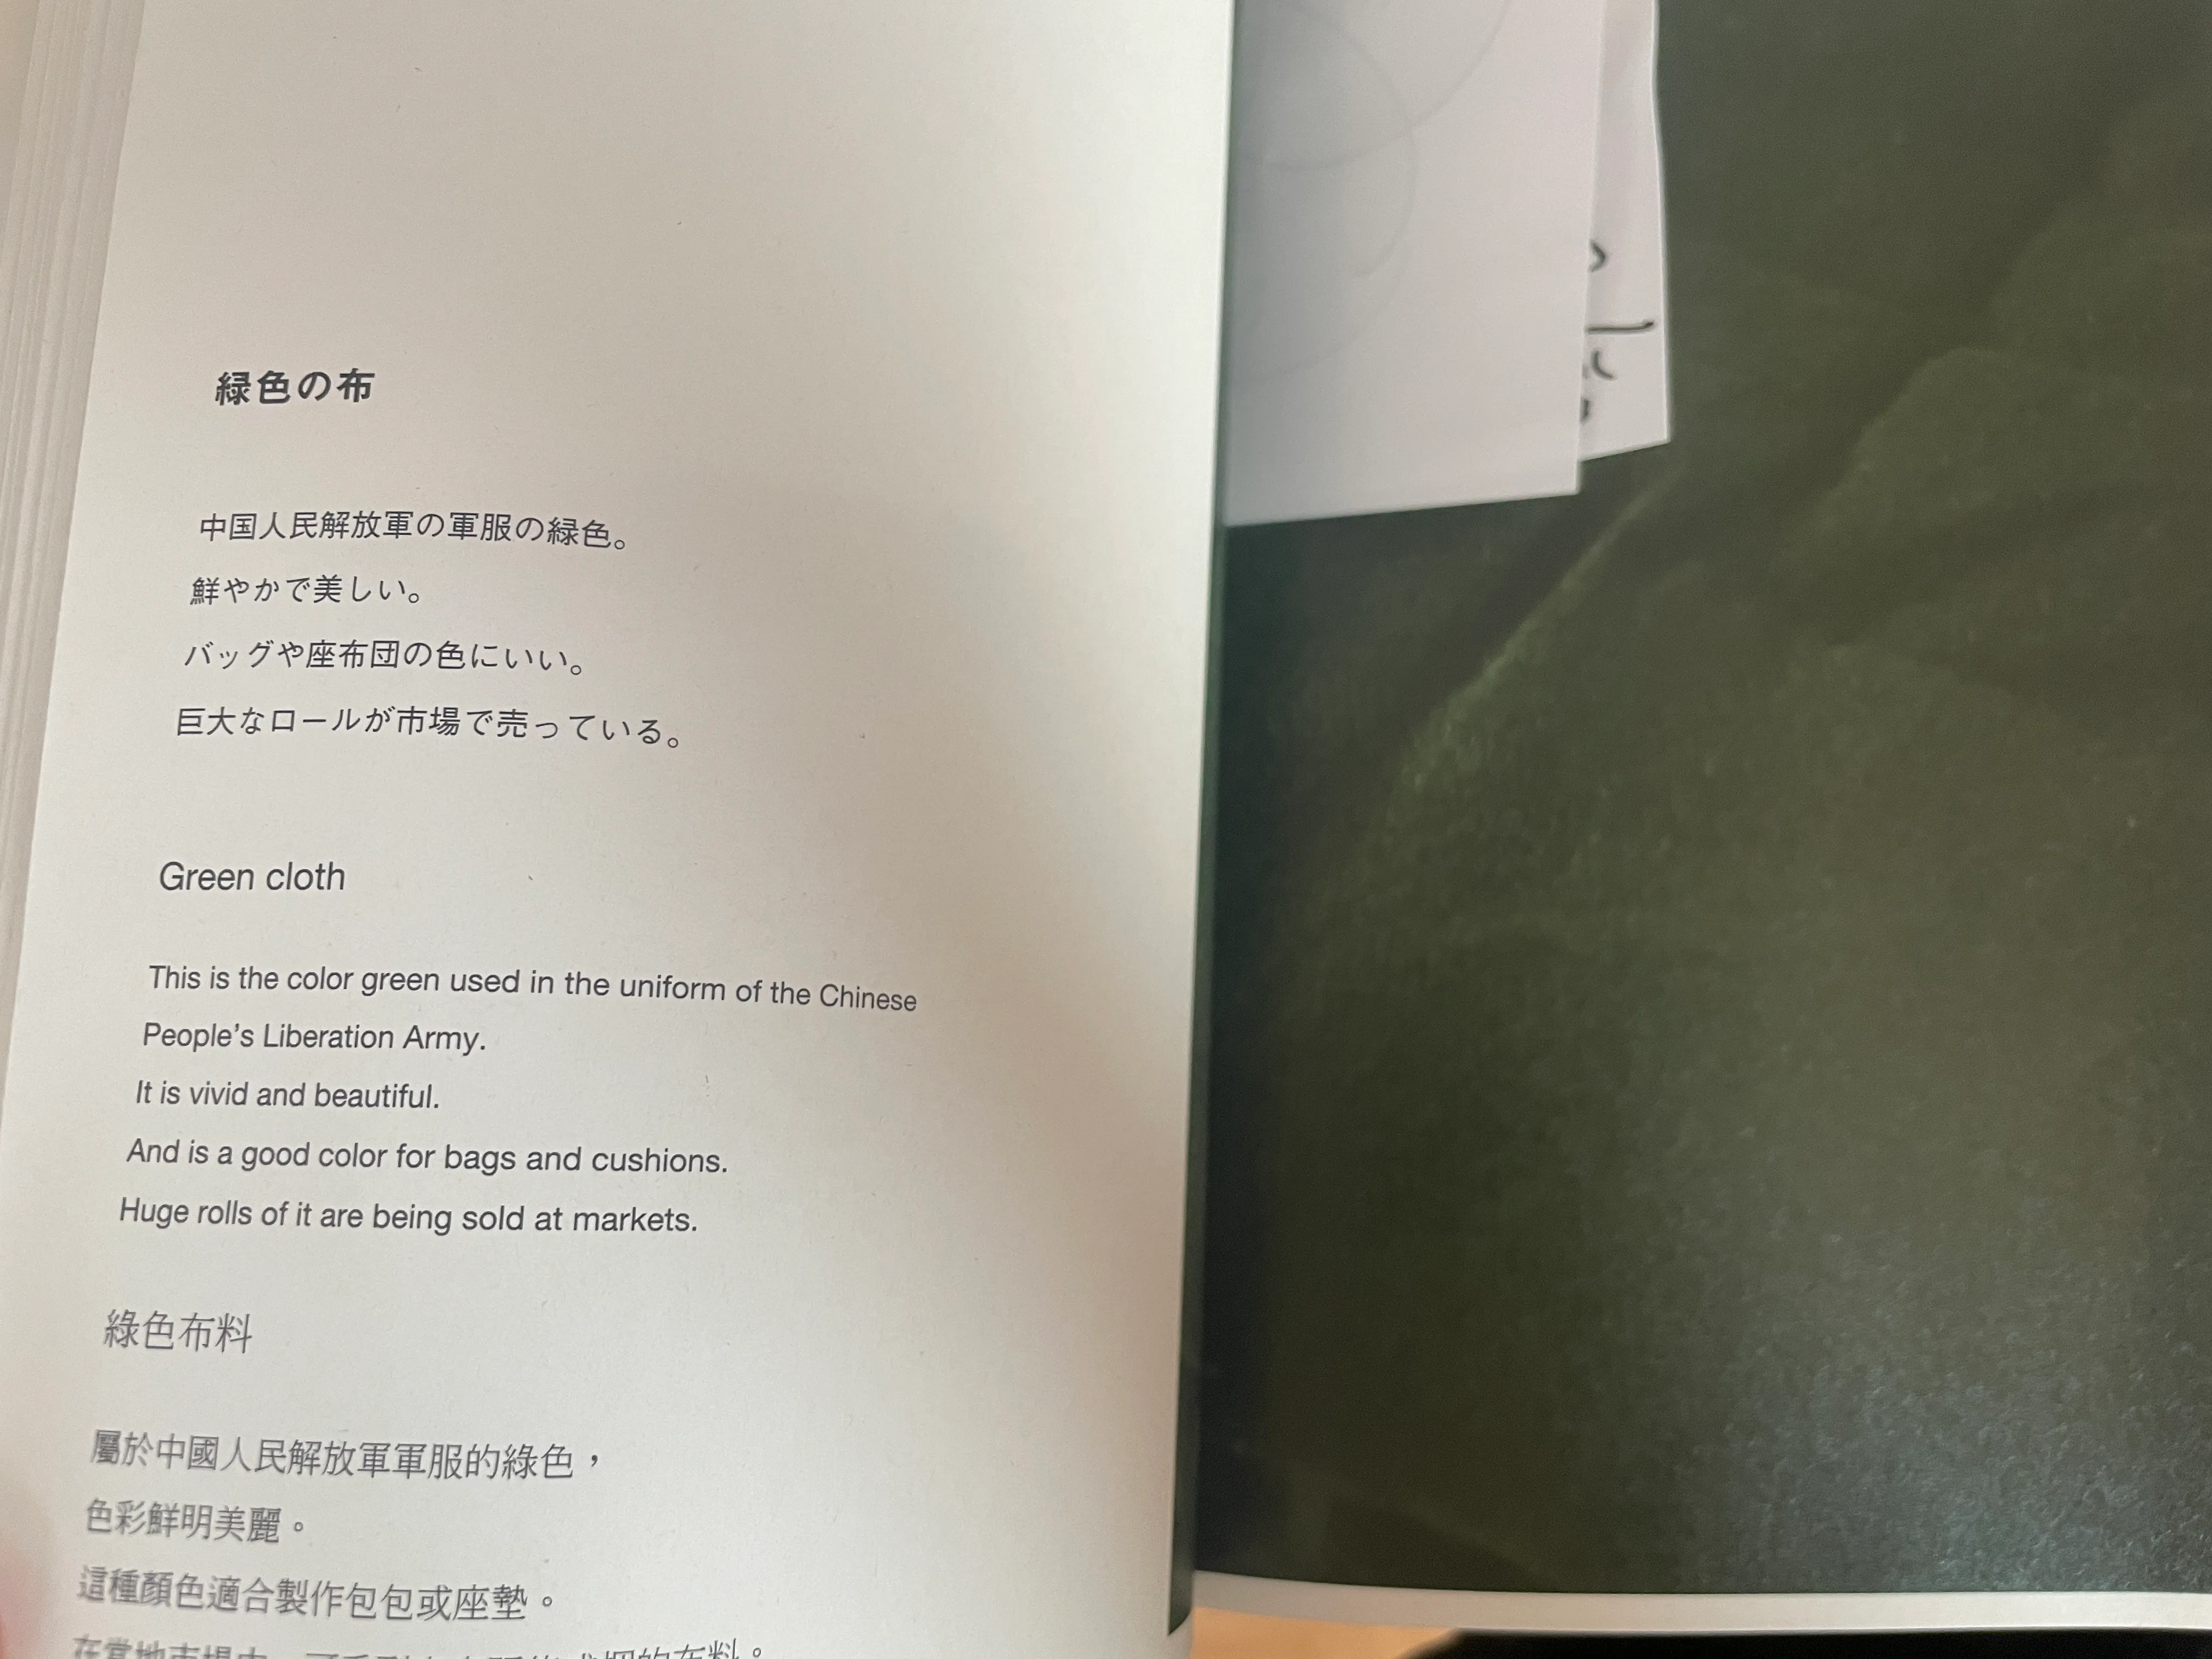 A photograph of favorite moment from Found Muji. A dark green ream of cloth, used in the uniform of the Chinese People's Liberation Army.